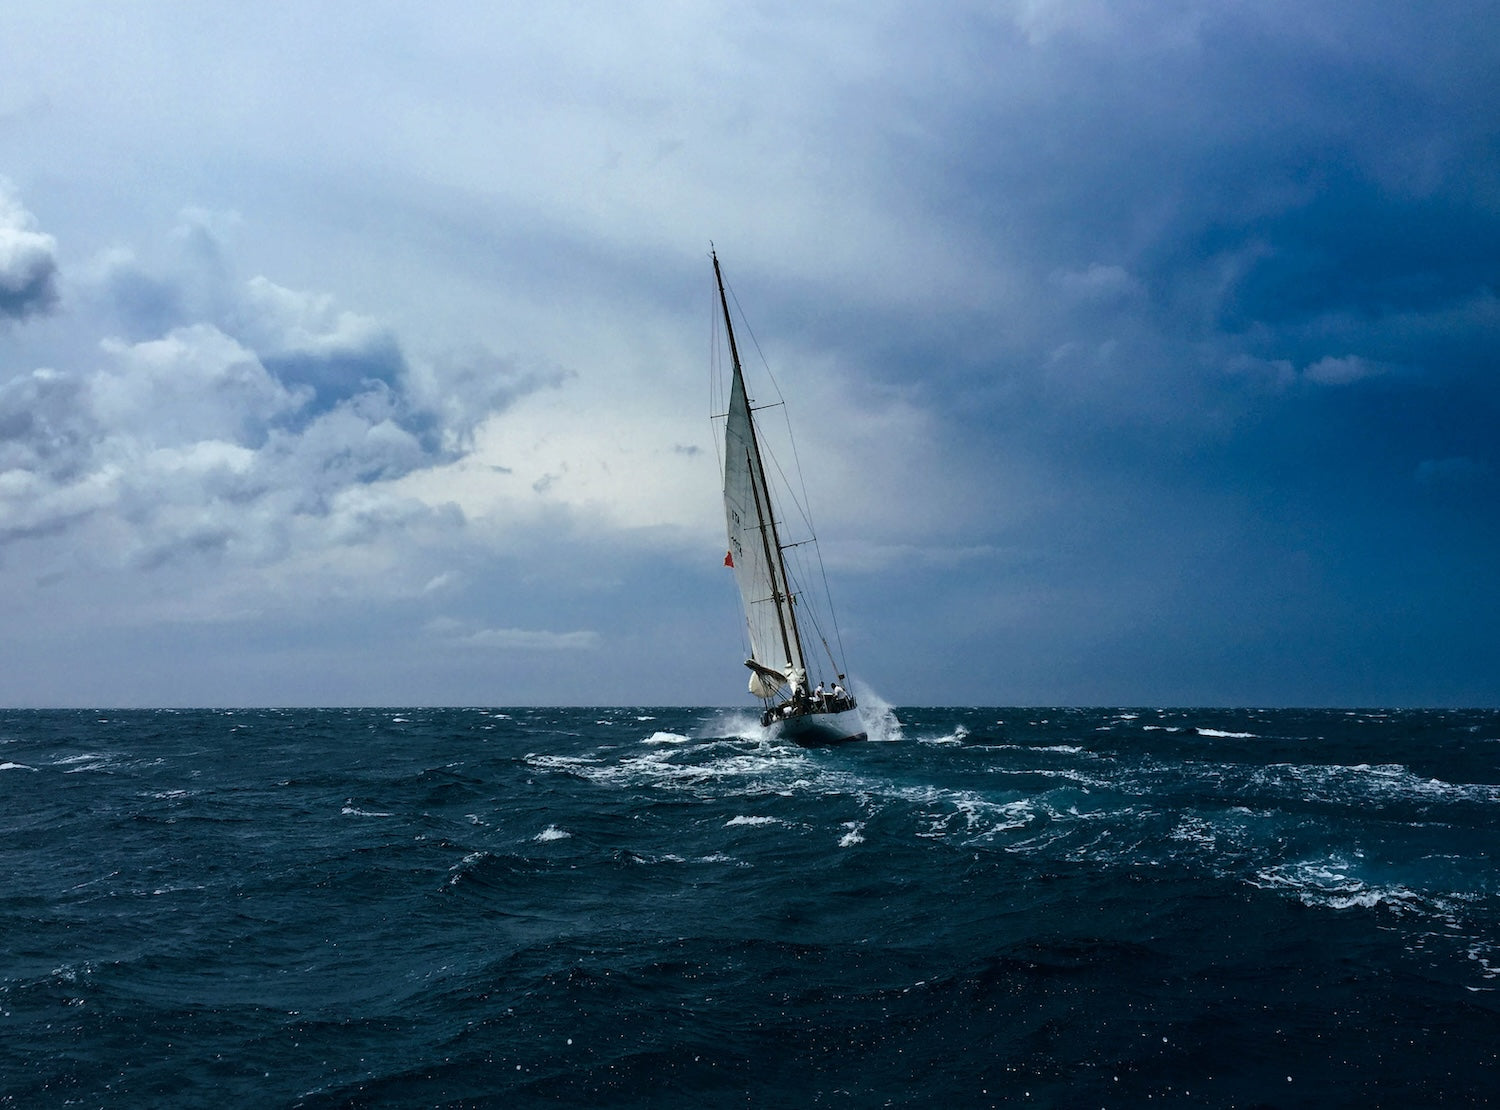 Photo: Sailboat in the storm